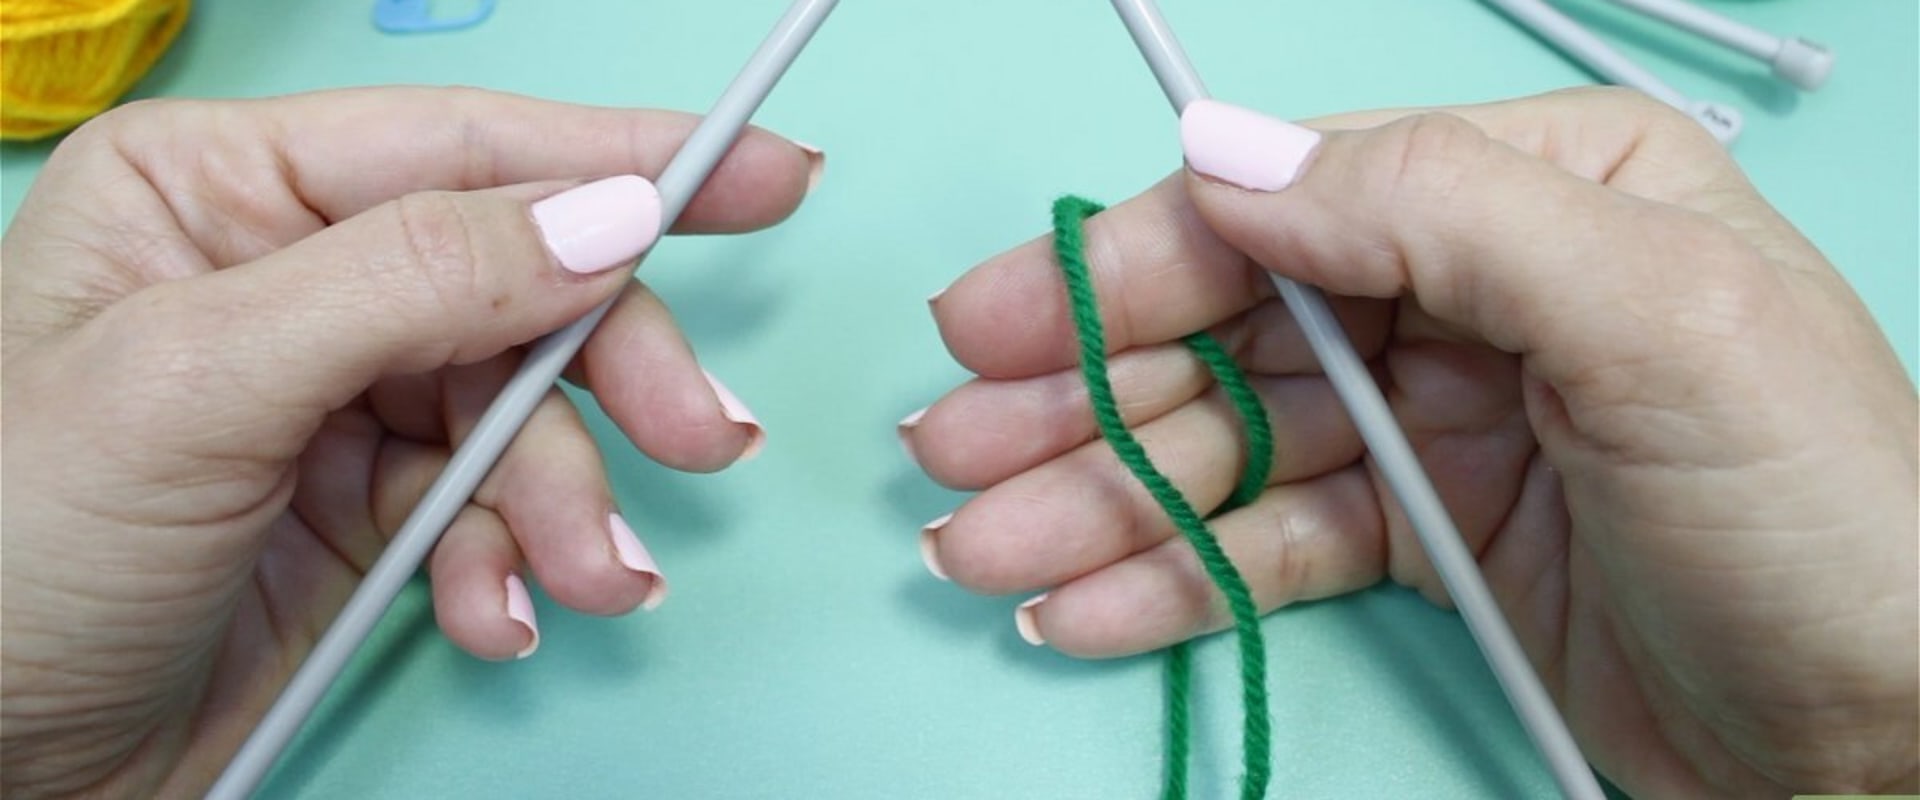 Why is Knitting So Difficult? An Expert's Perspective